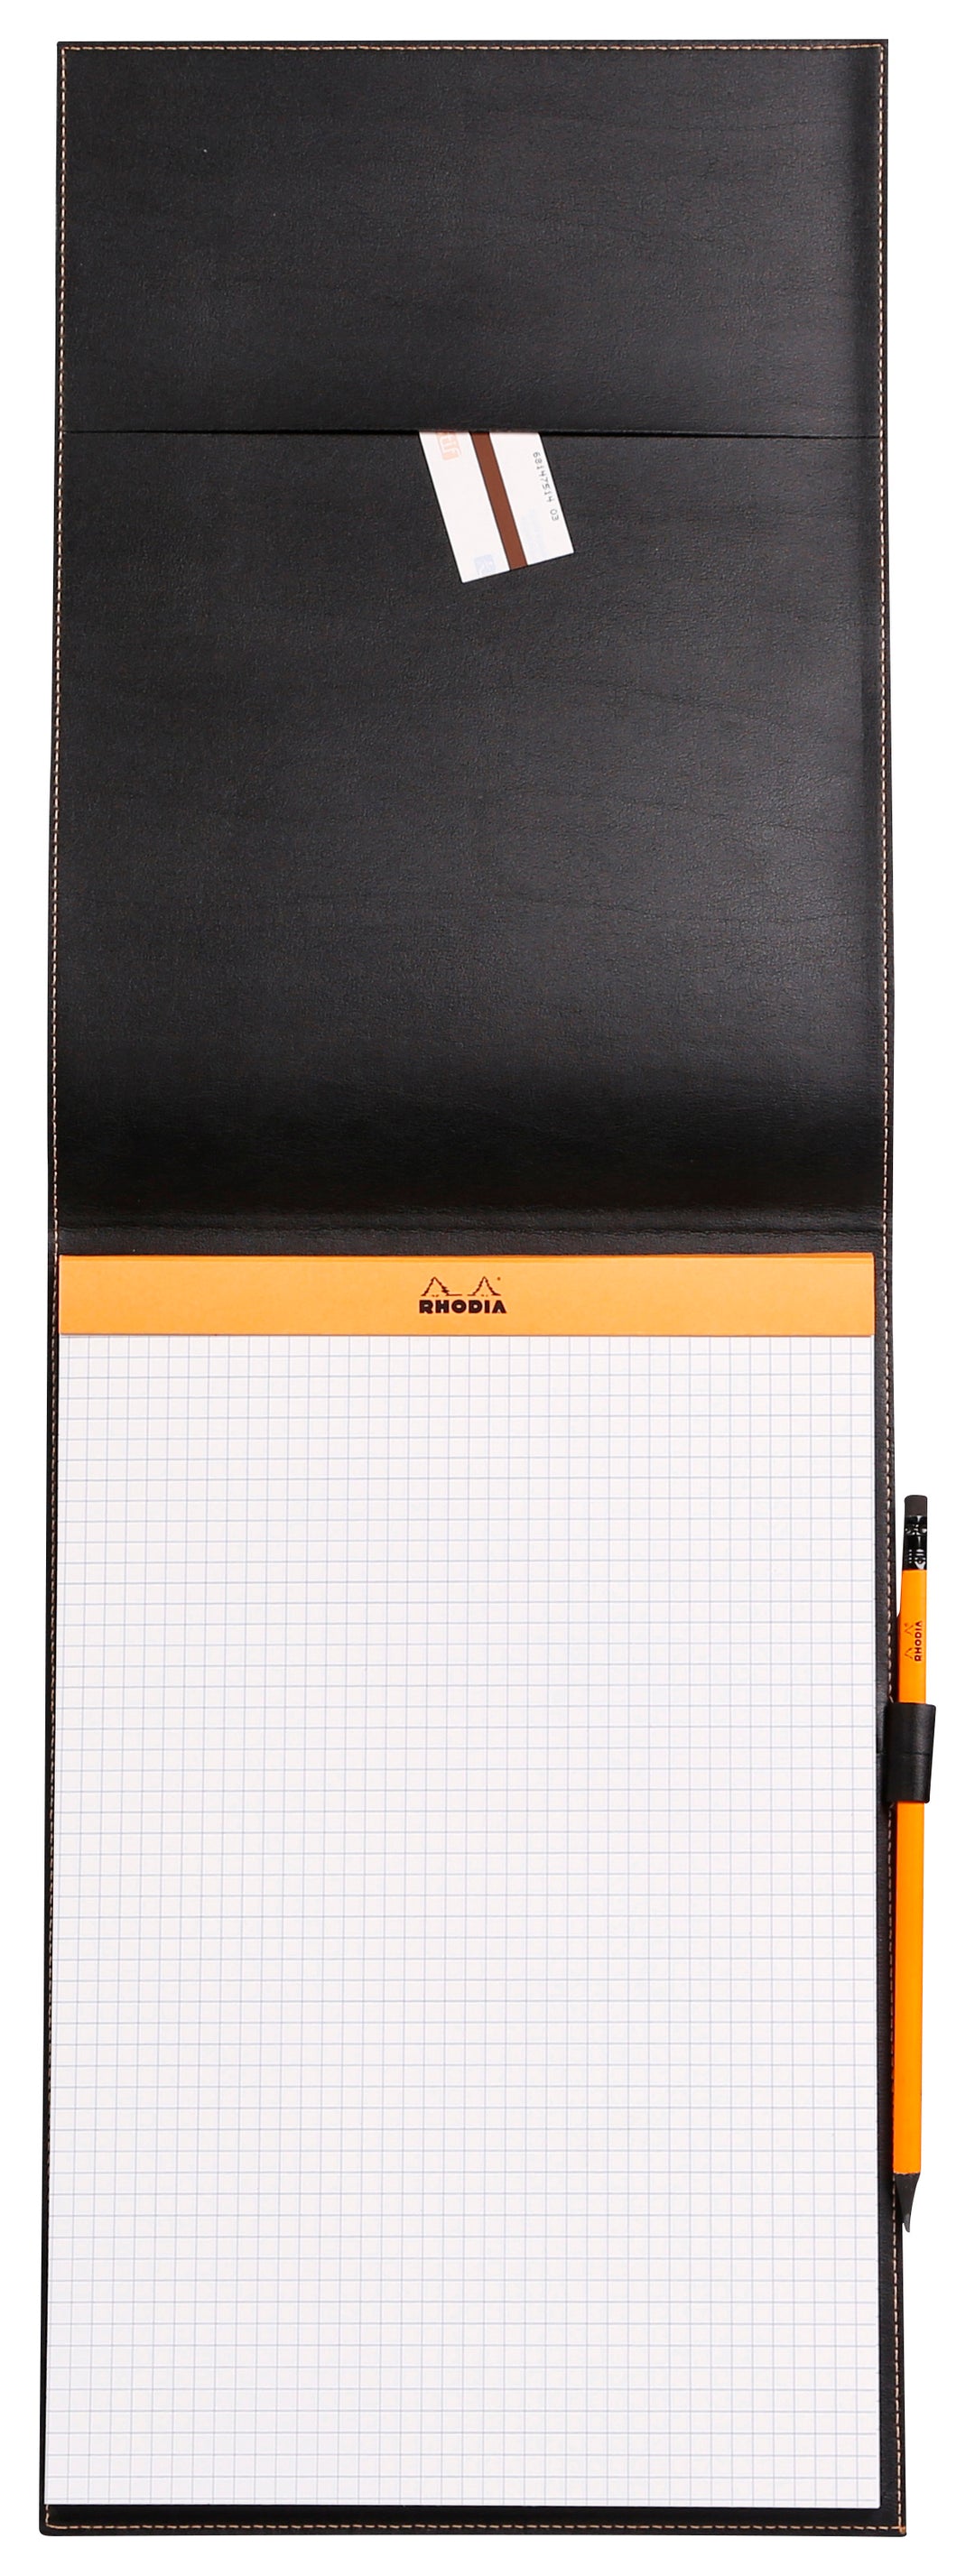 Rhodia Boutique Black Stapled Square Grid Ruled Notepad with Leatherette Cover - A4+